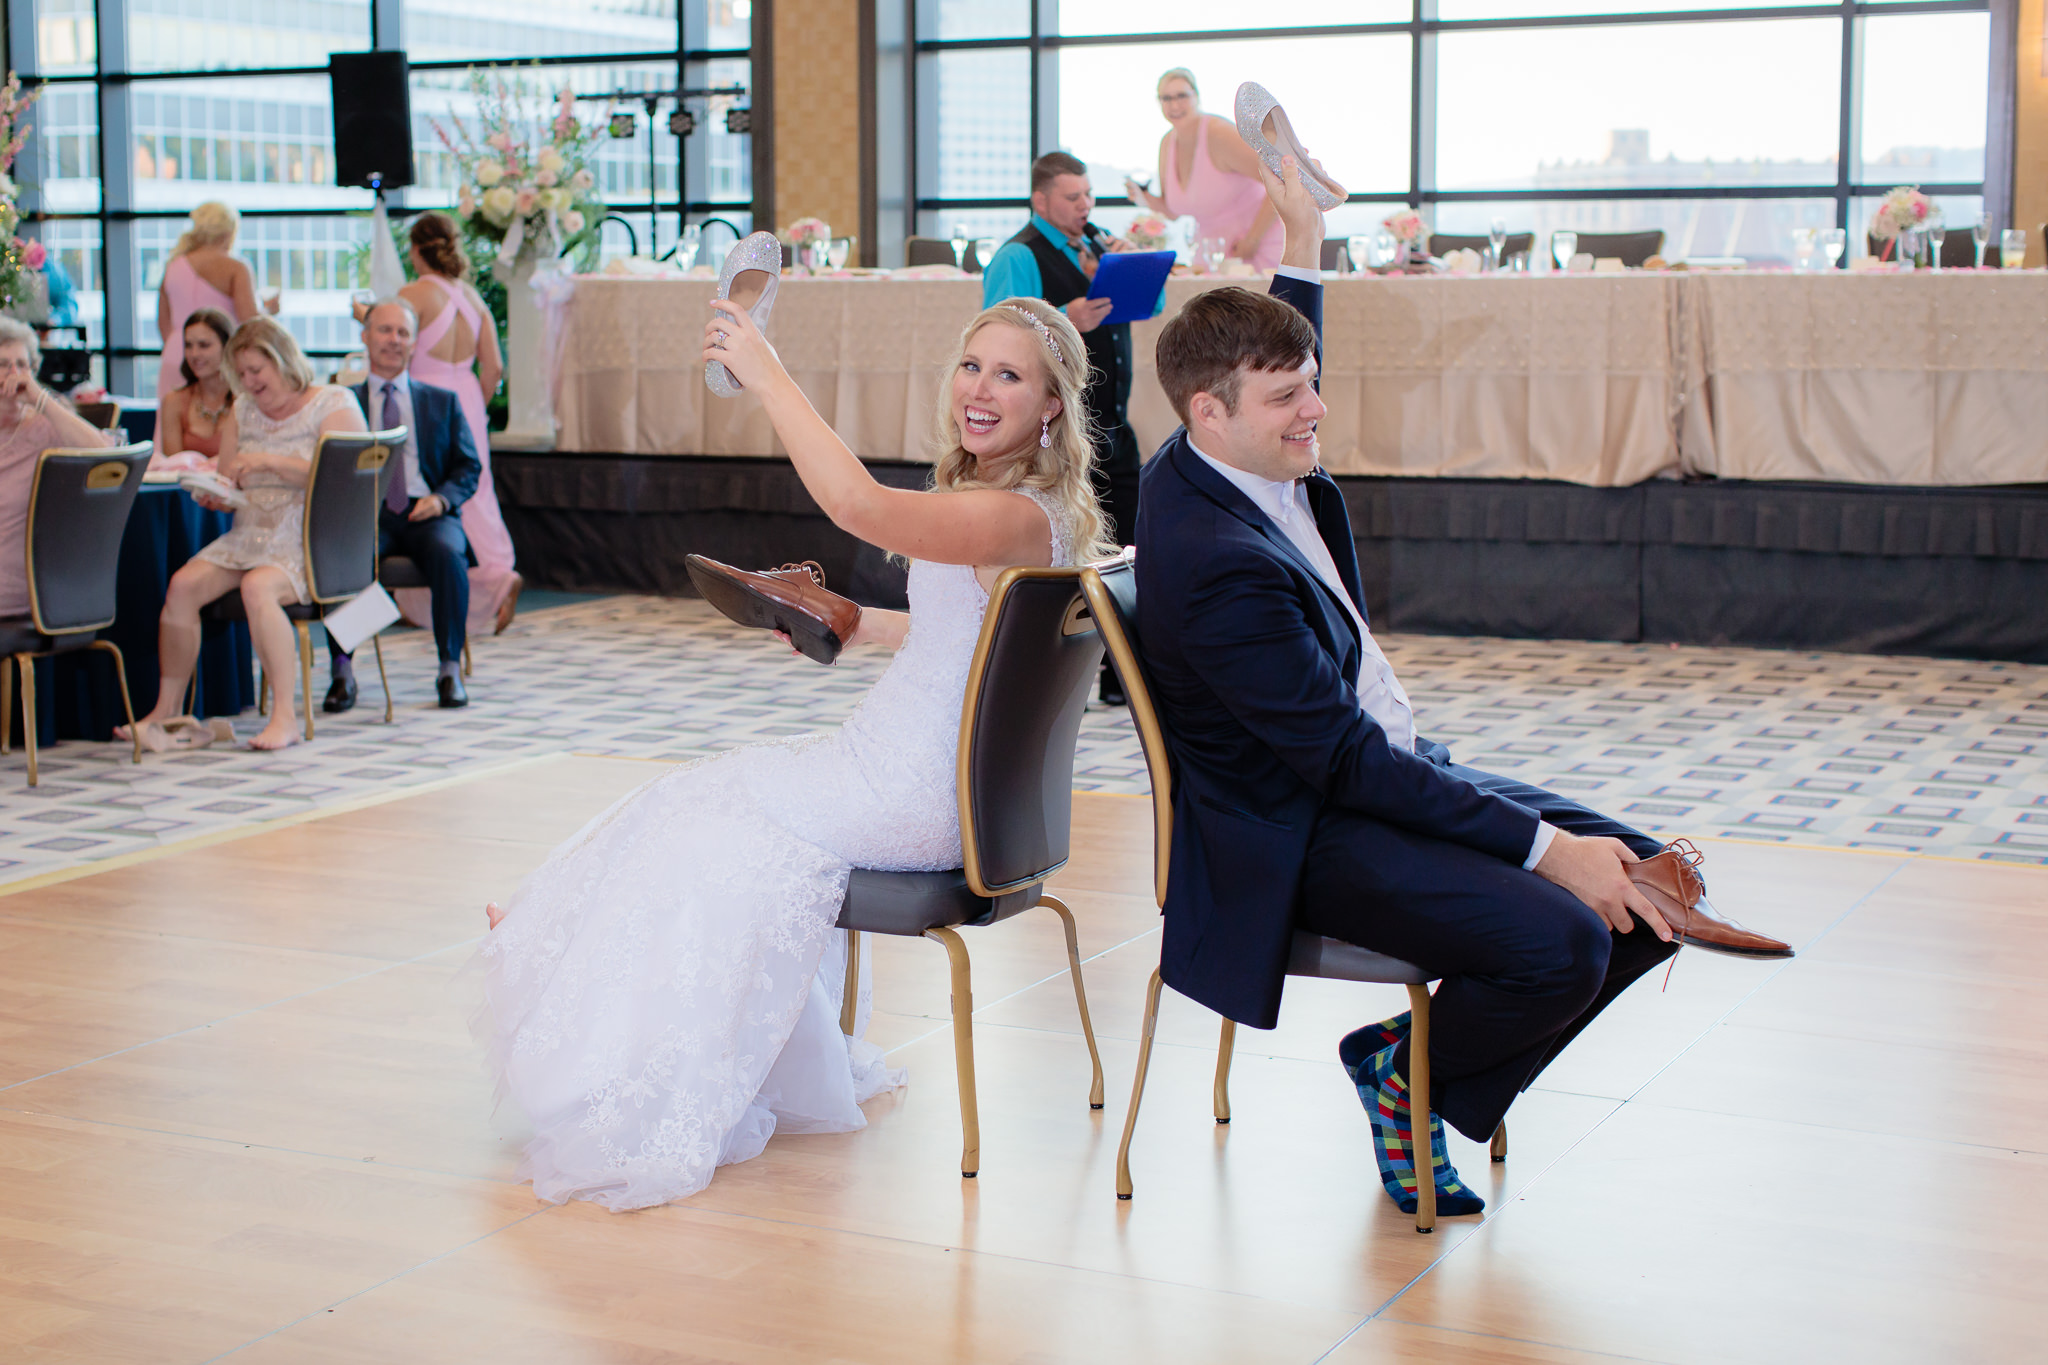 Newlyweds play the shoe game at their Duquesne University wedding reception